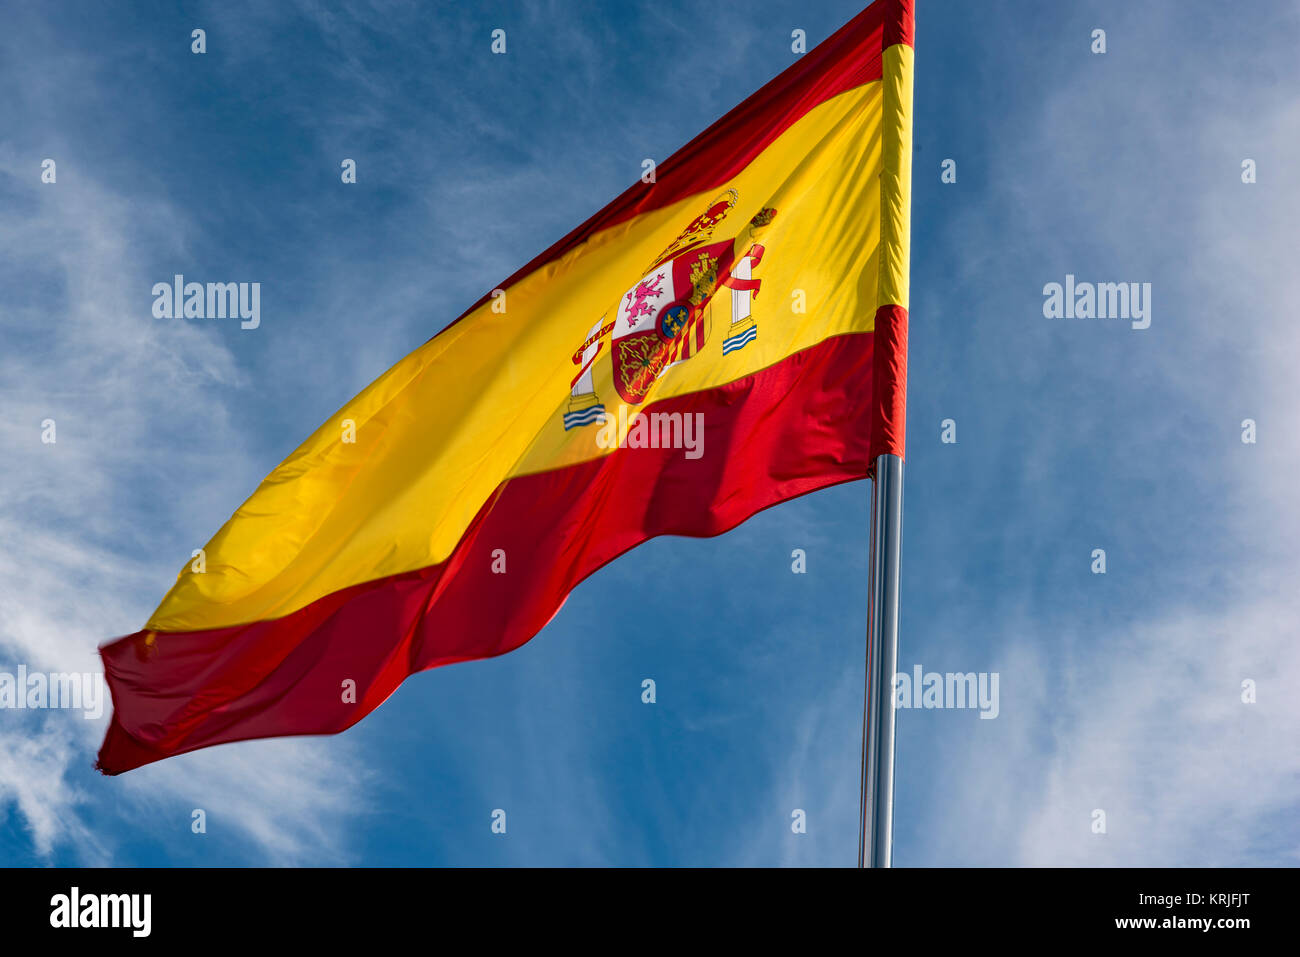 Spanish Flag Showing the Crown  Flies in front of a Blue Sky with With Clouds Stock Photo